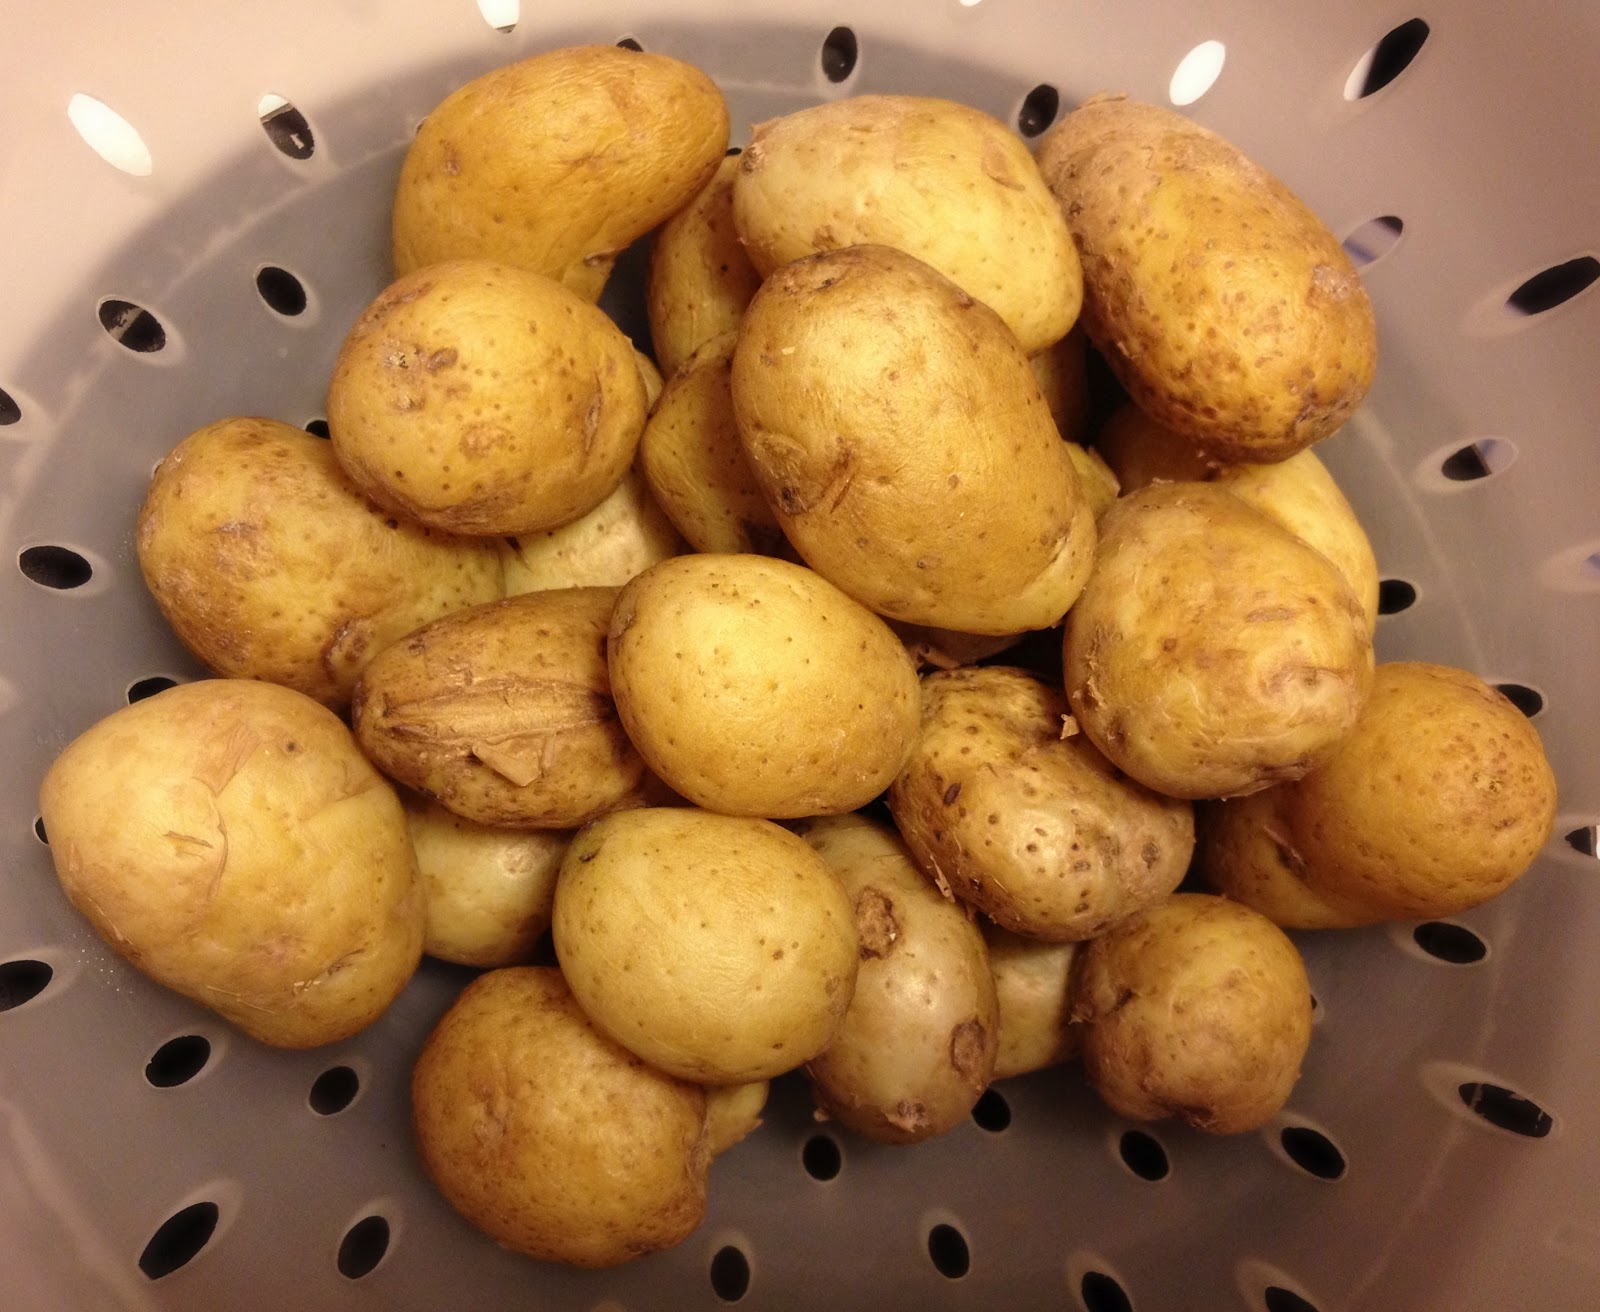 jersey royal potatoes for sale